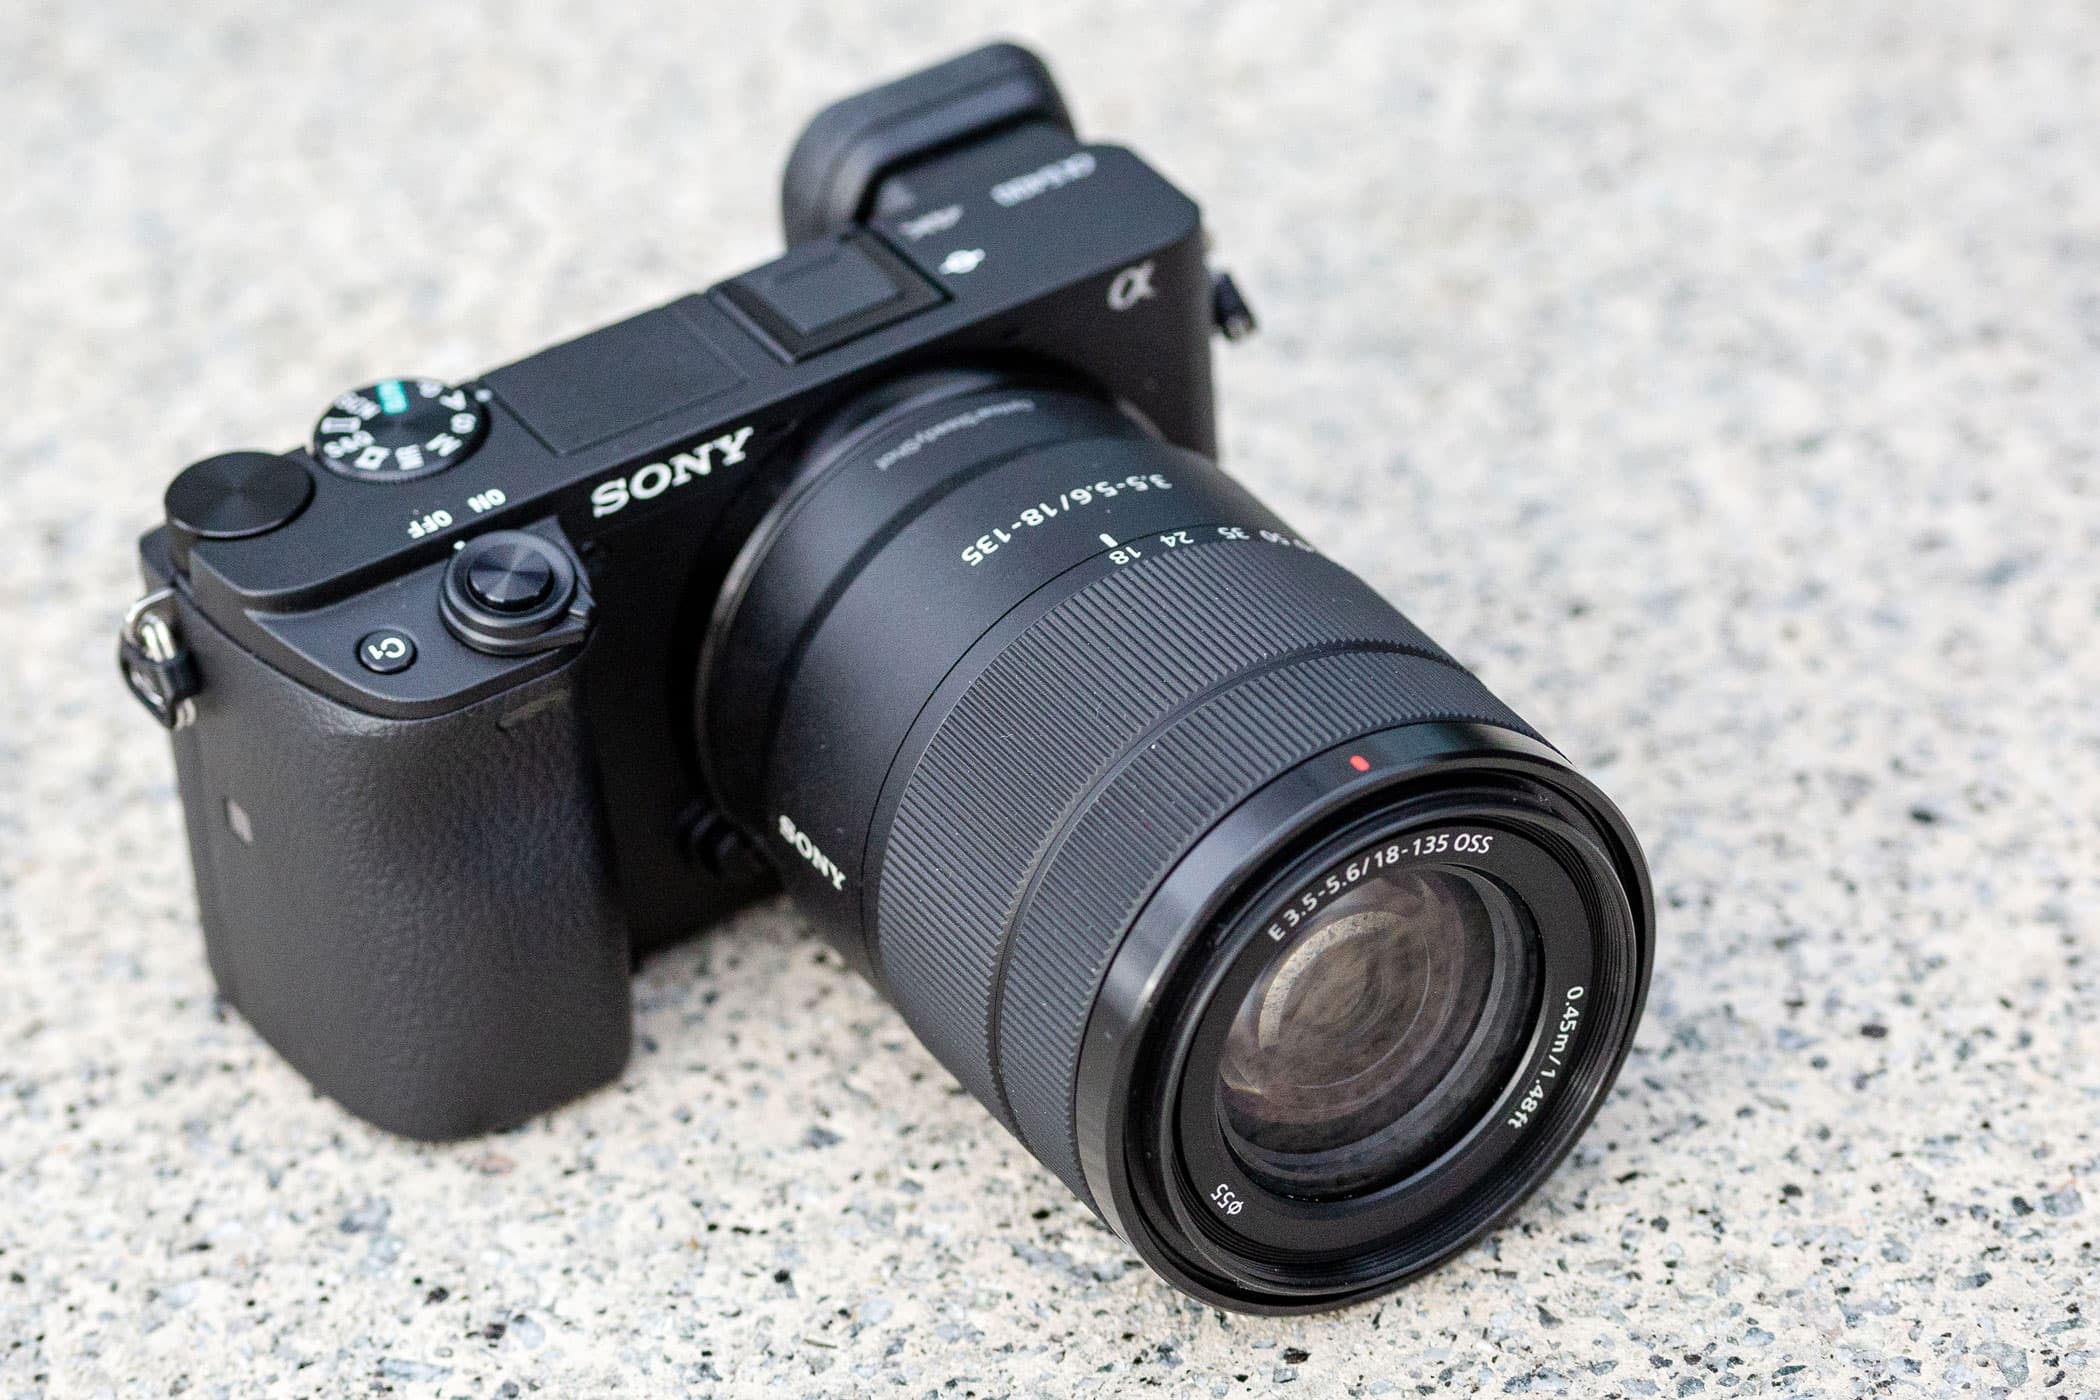 Chip shortage halts some Sony orders - Amateur Photographer